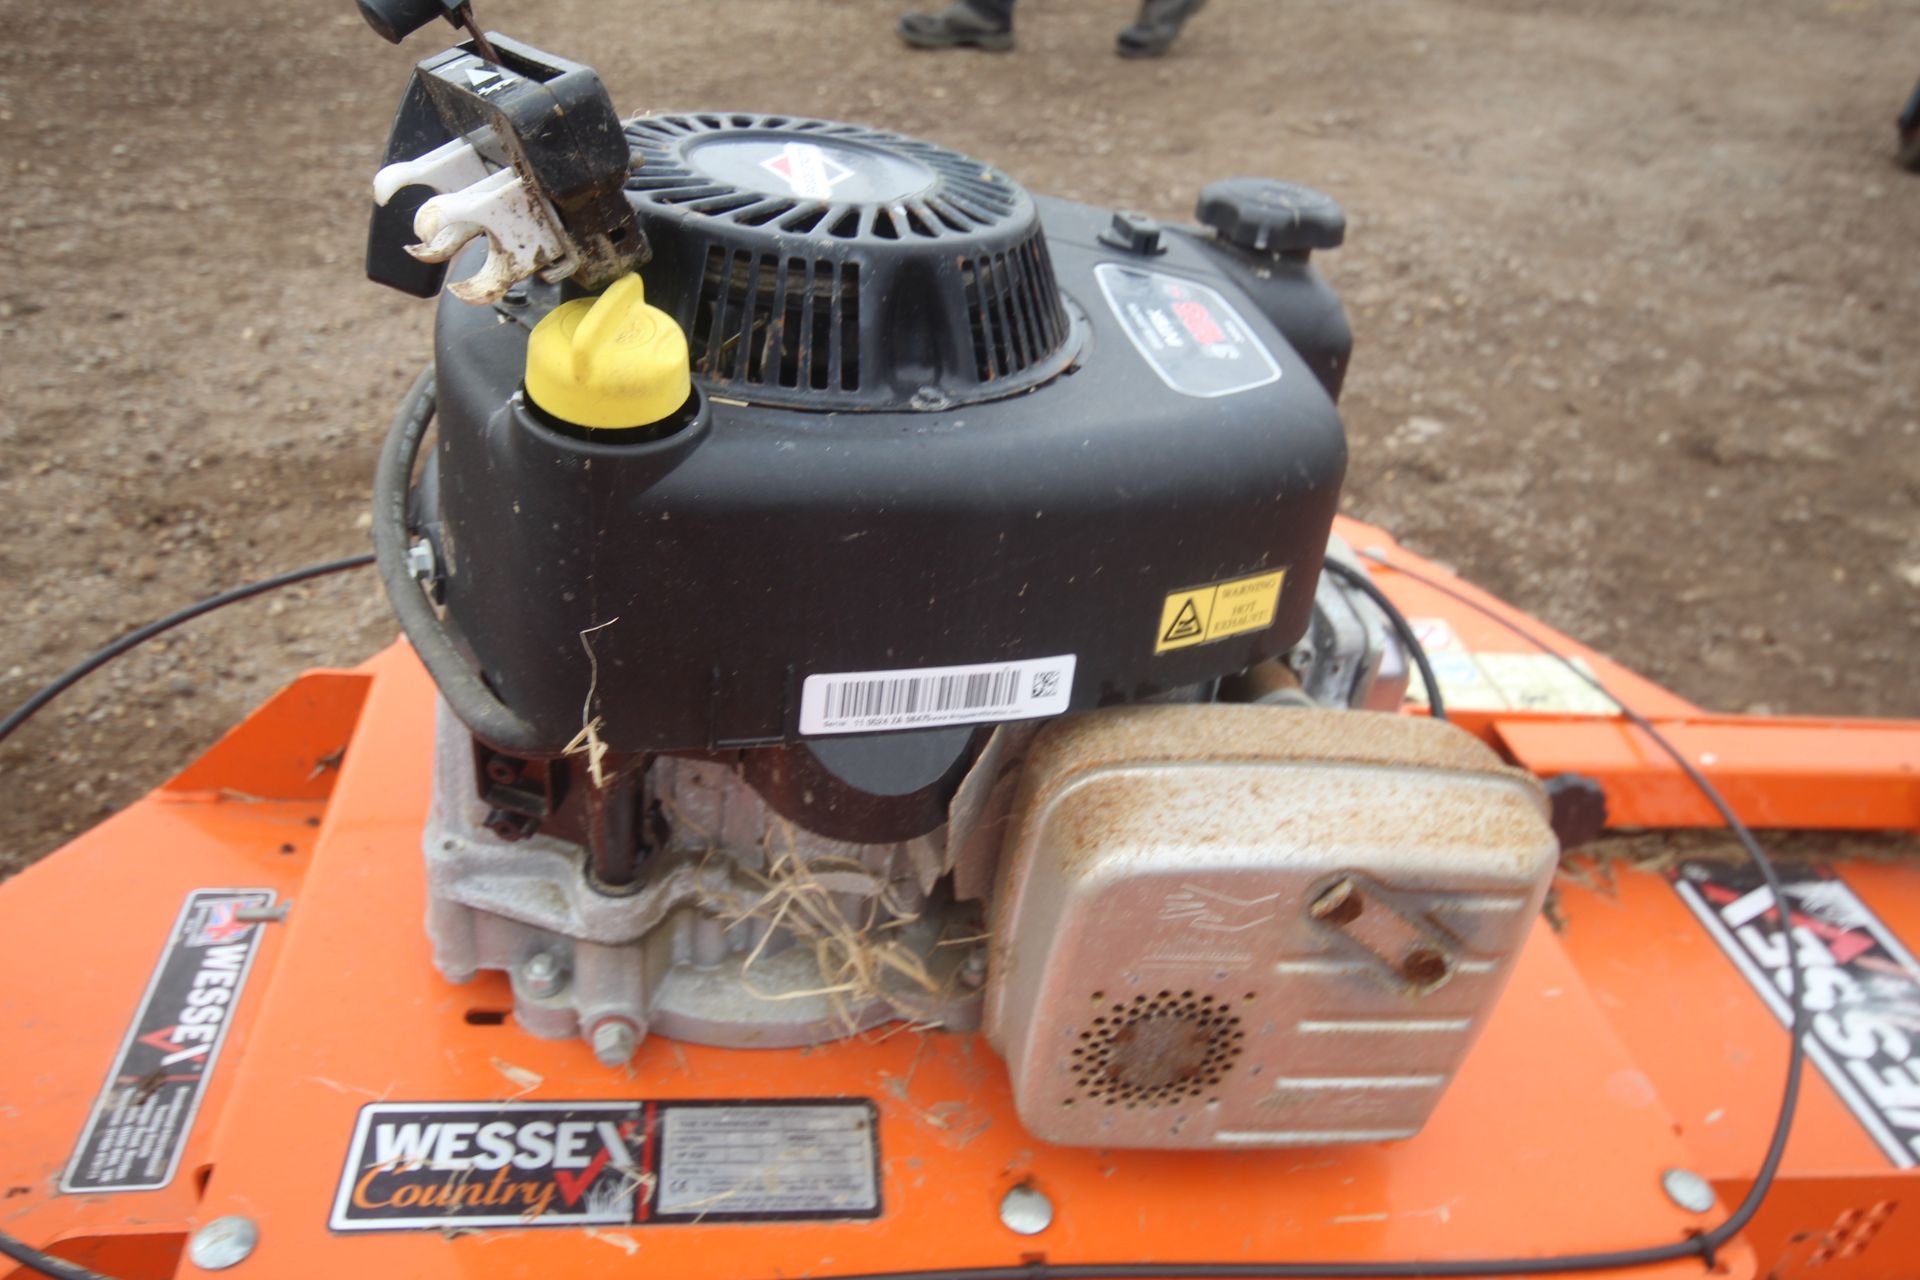 Wessex Country AT110 rotory topper for quad bike. 2012. With Briggs & Stratton petrol engine. V - Bild 12 aus 17